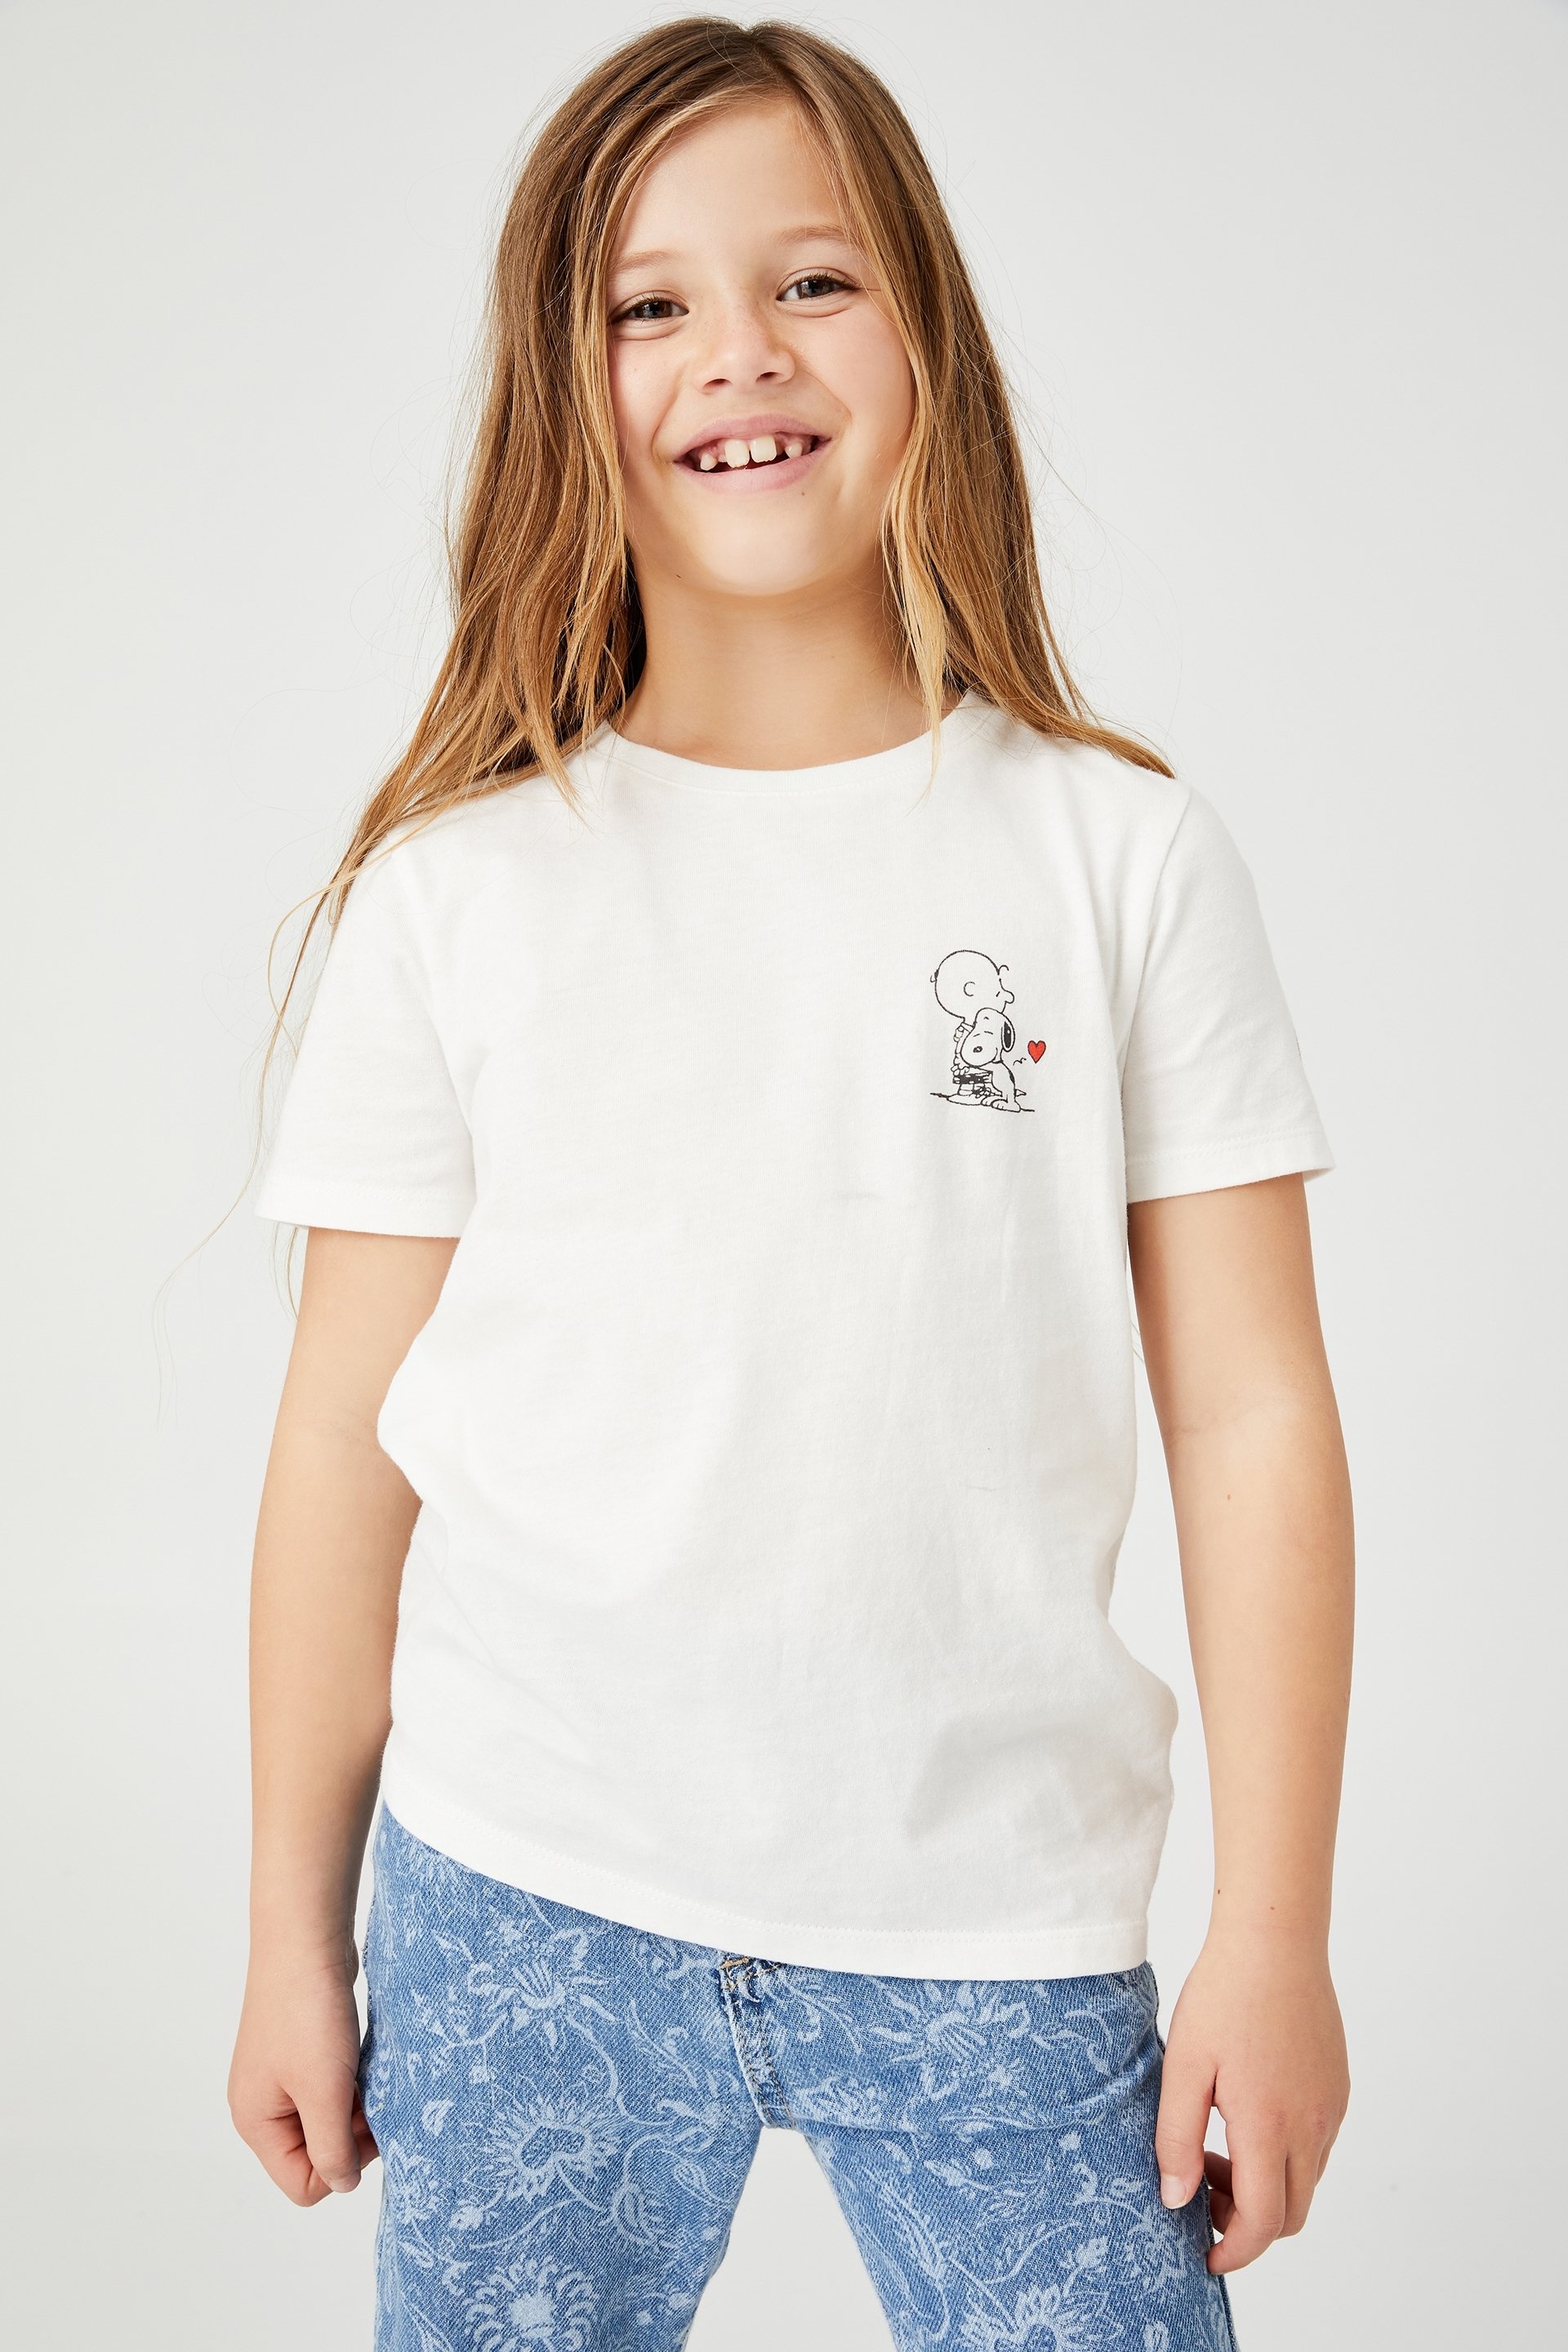 Cotton On Kids - License Short Sleeve Tee - Lcn pea snoopy and charlie/vanilla